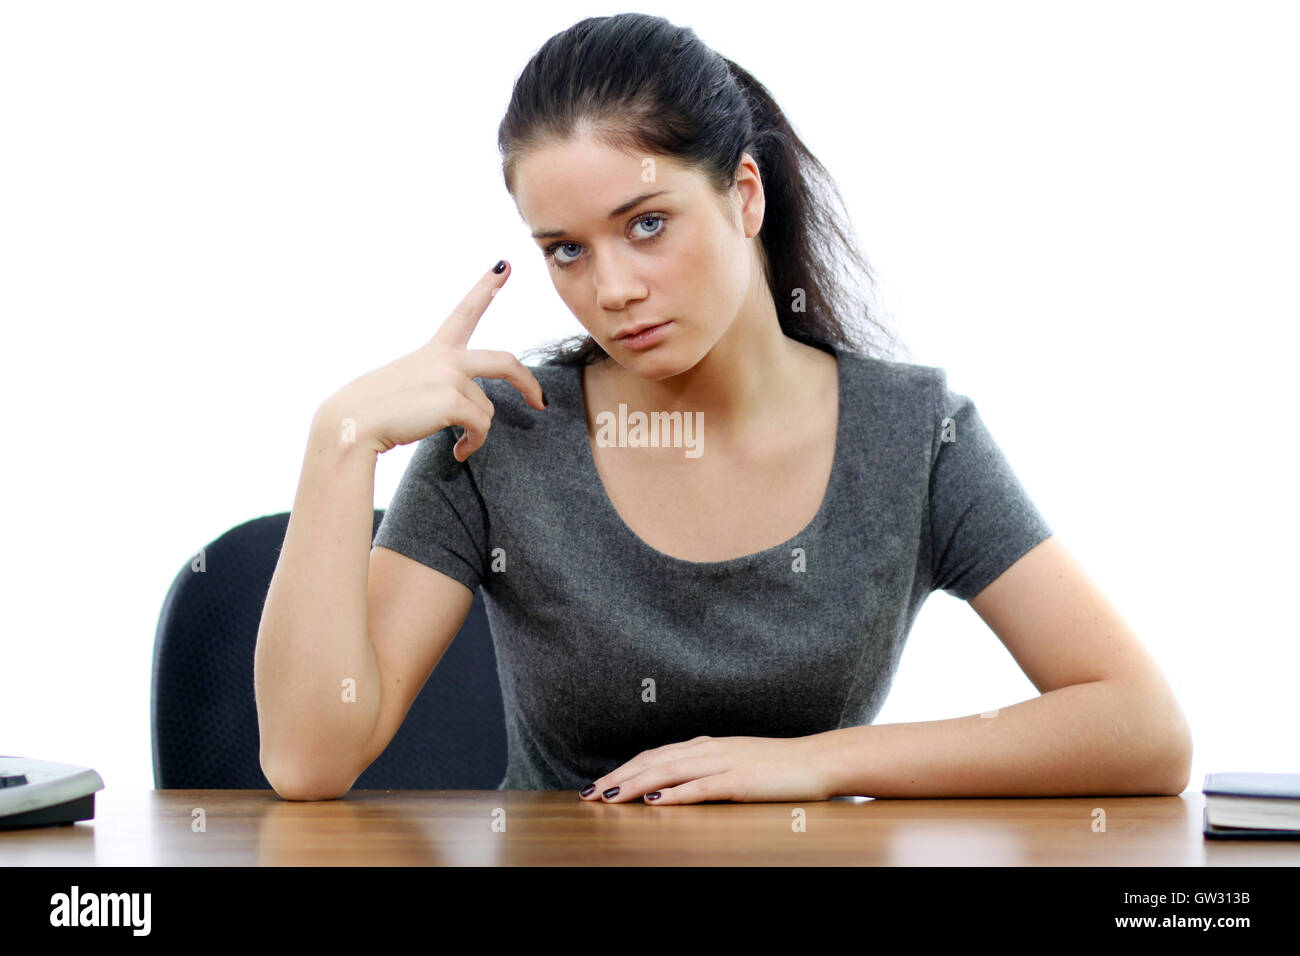 Brunette young woman Stock Photo